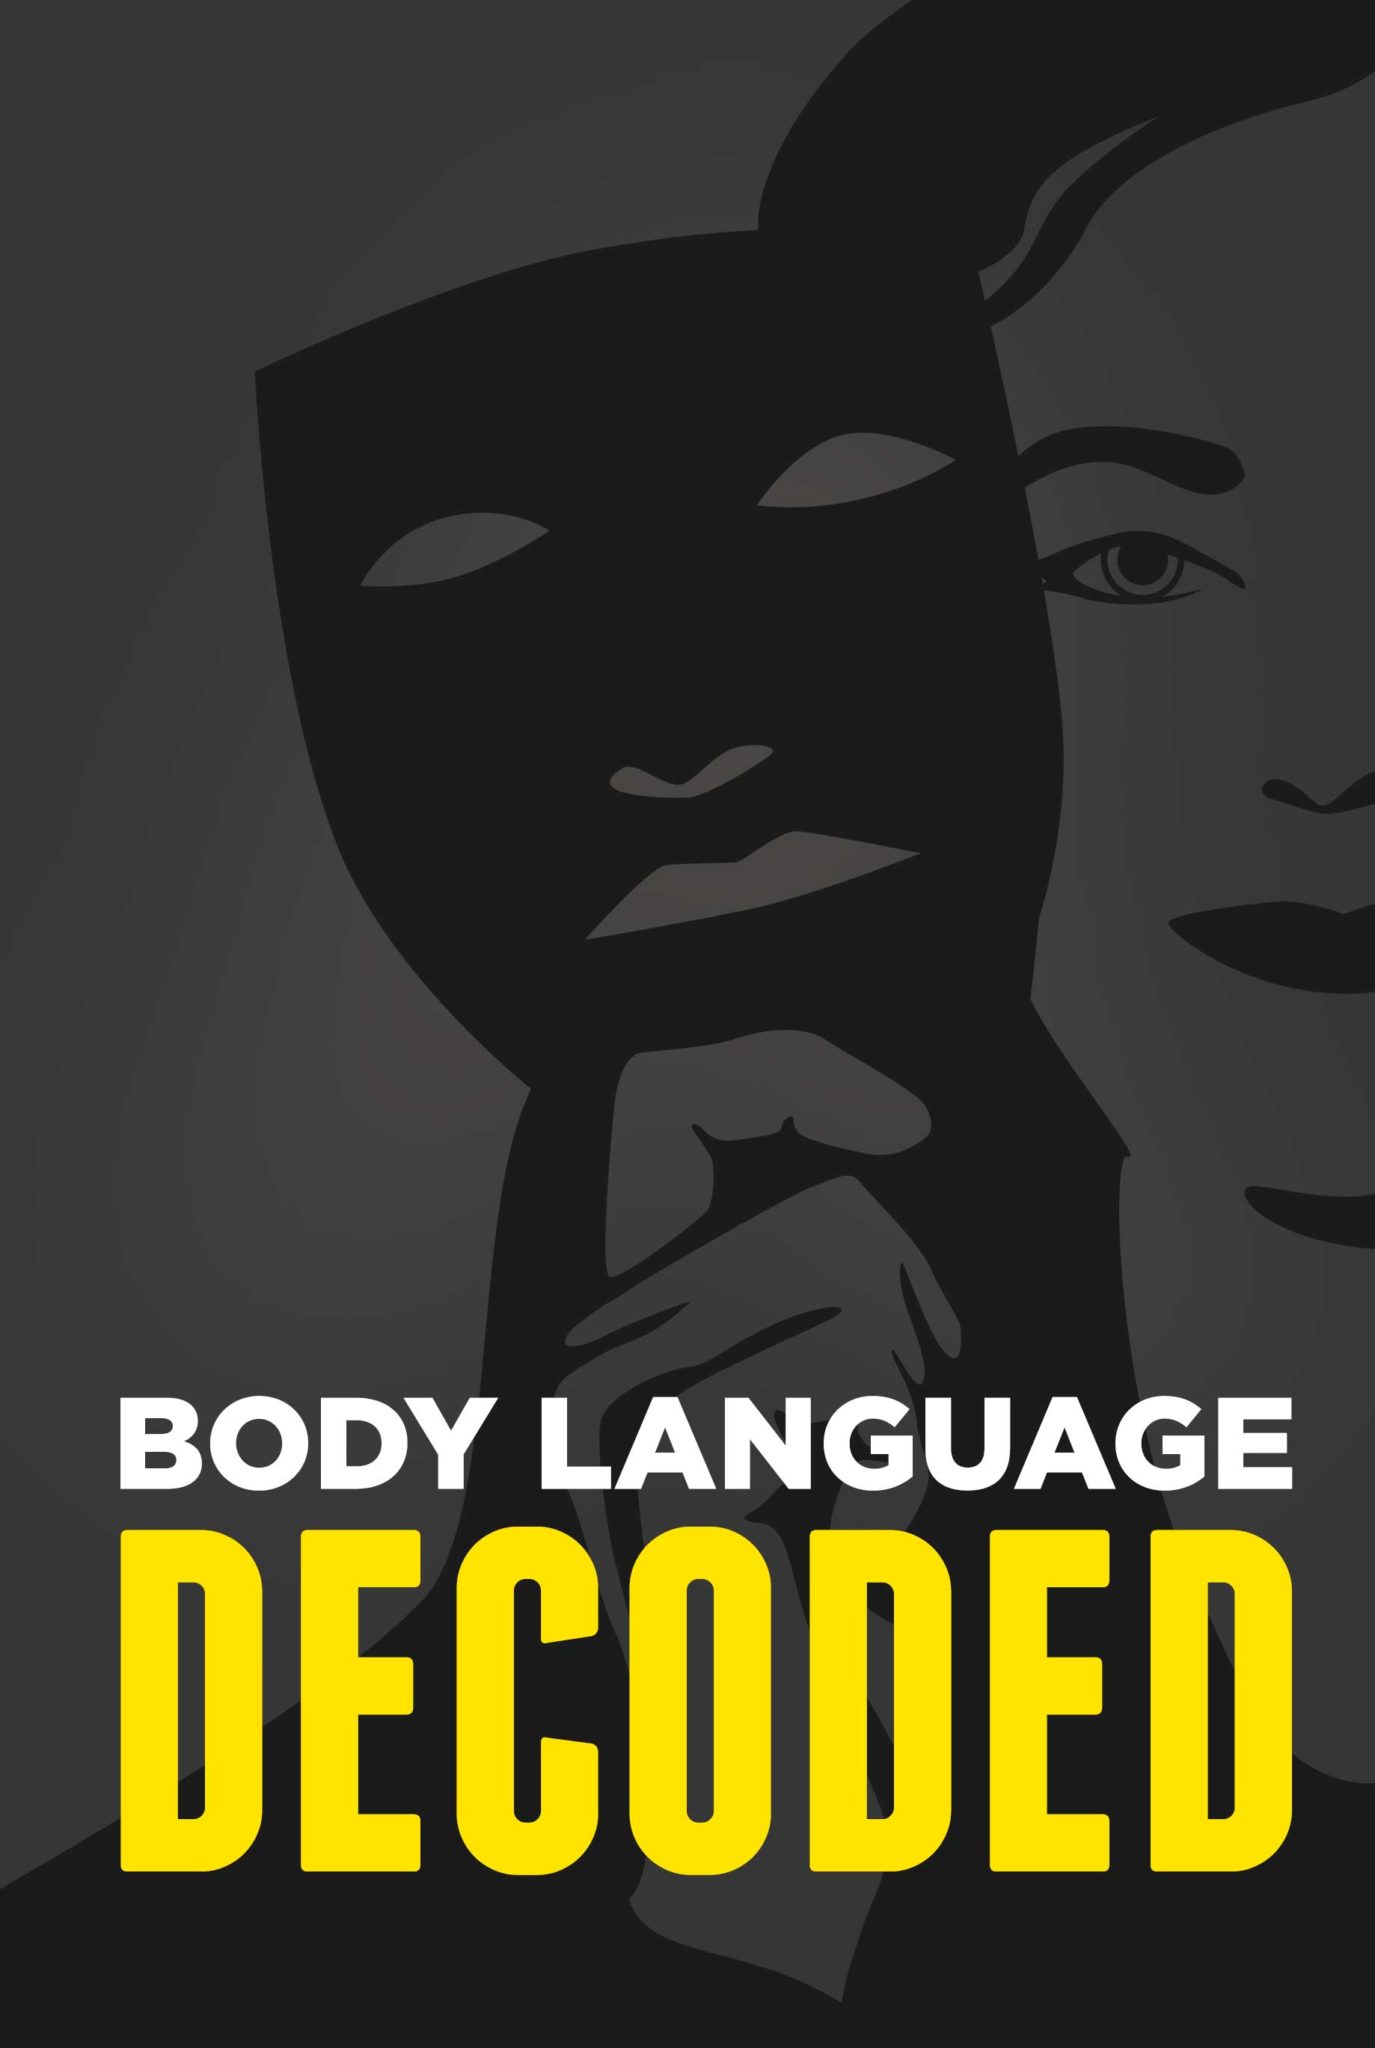 FREE: Body Language Decoded: Read people, Convey Confidence, And Master Body Language To Get What You Want by Henry J